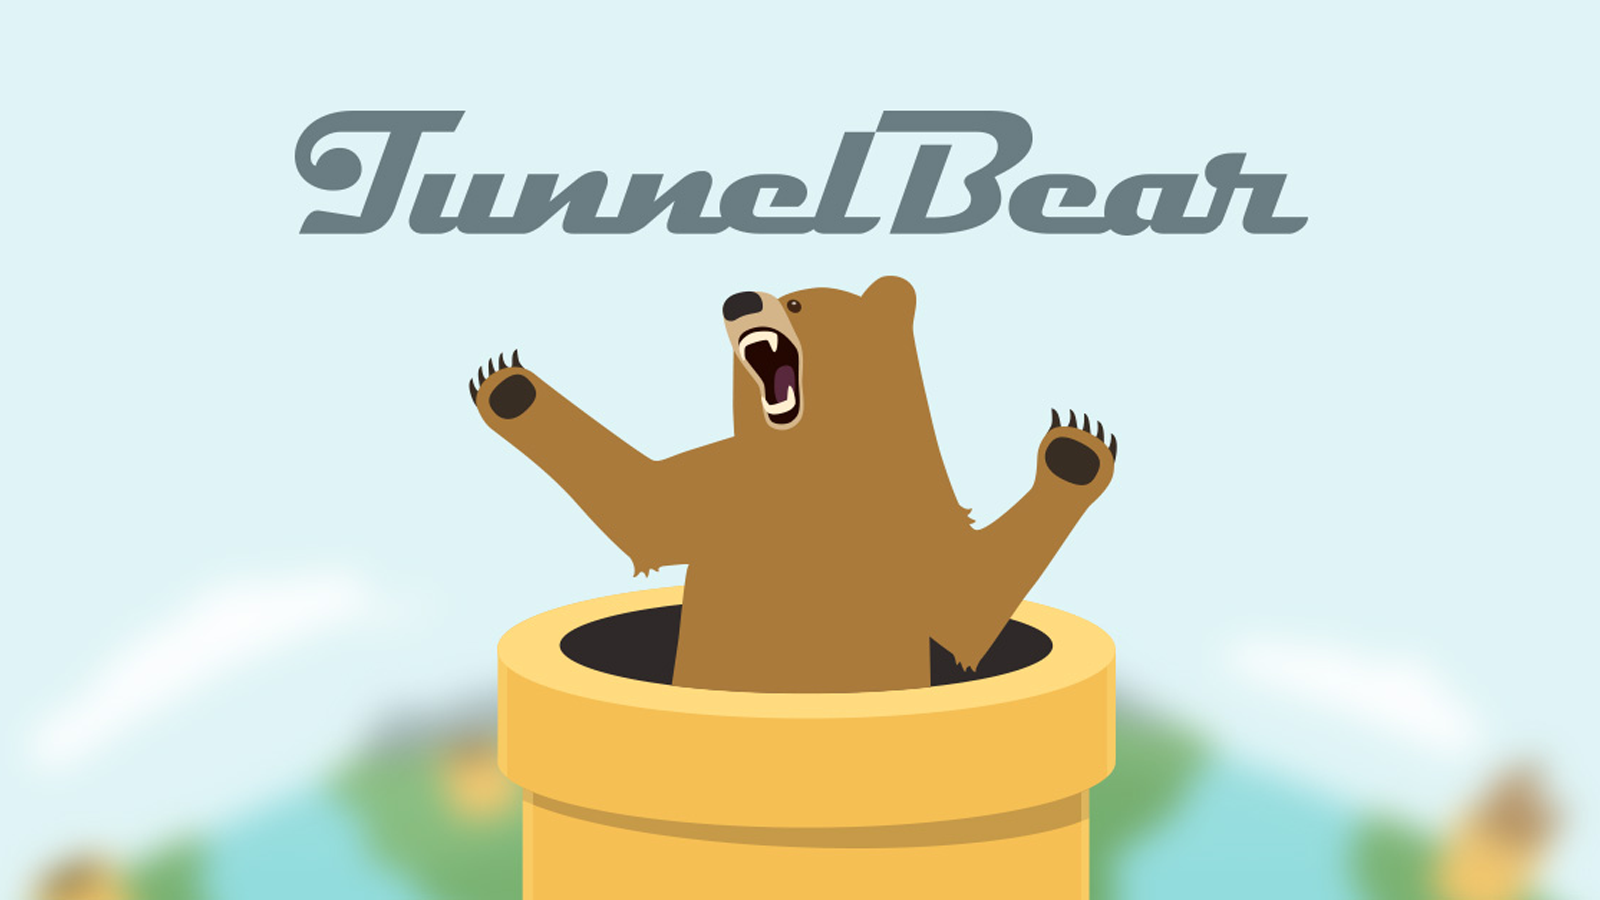 Tunnelbear name and logo against blurry mountain background